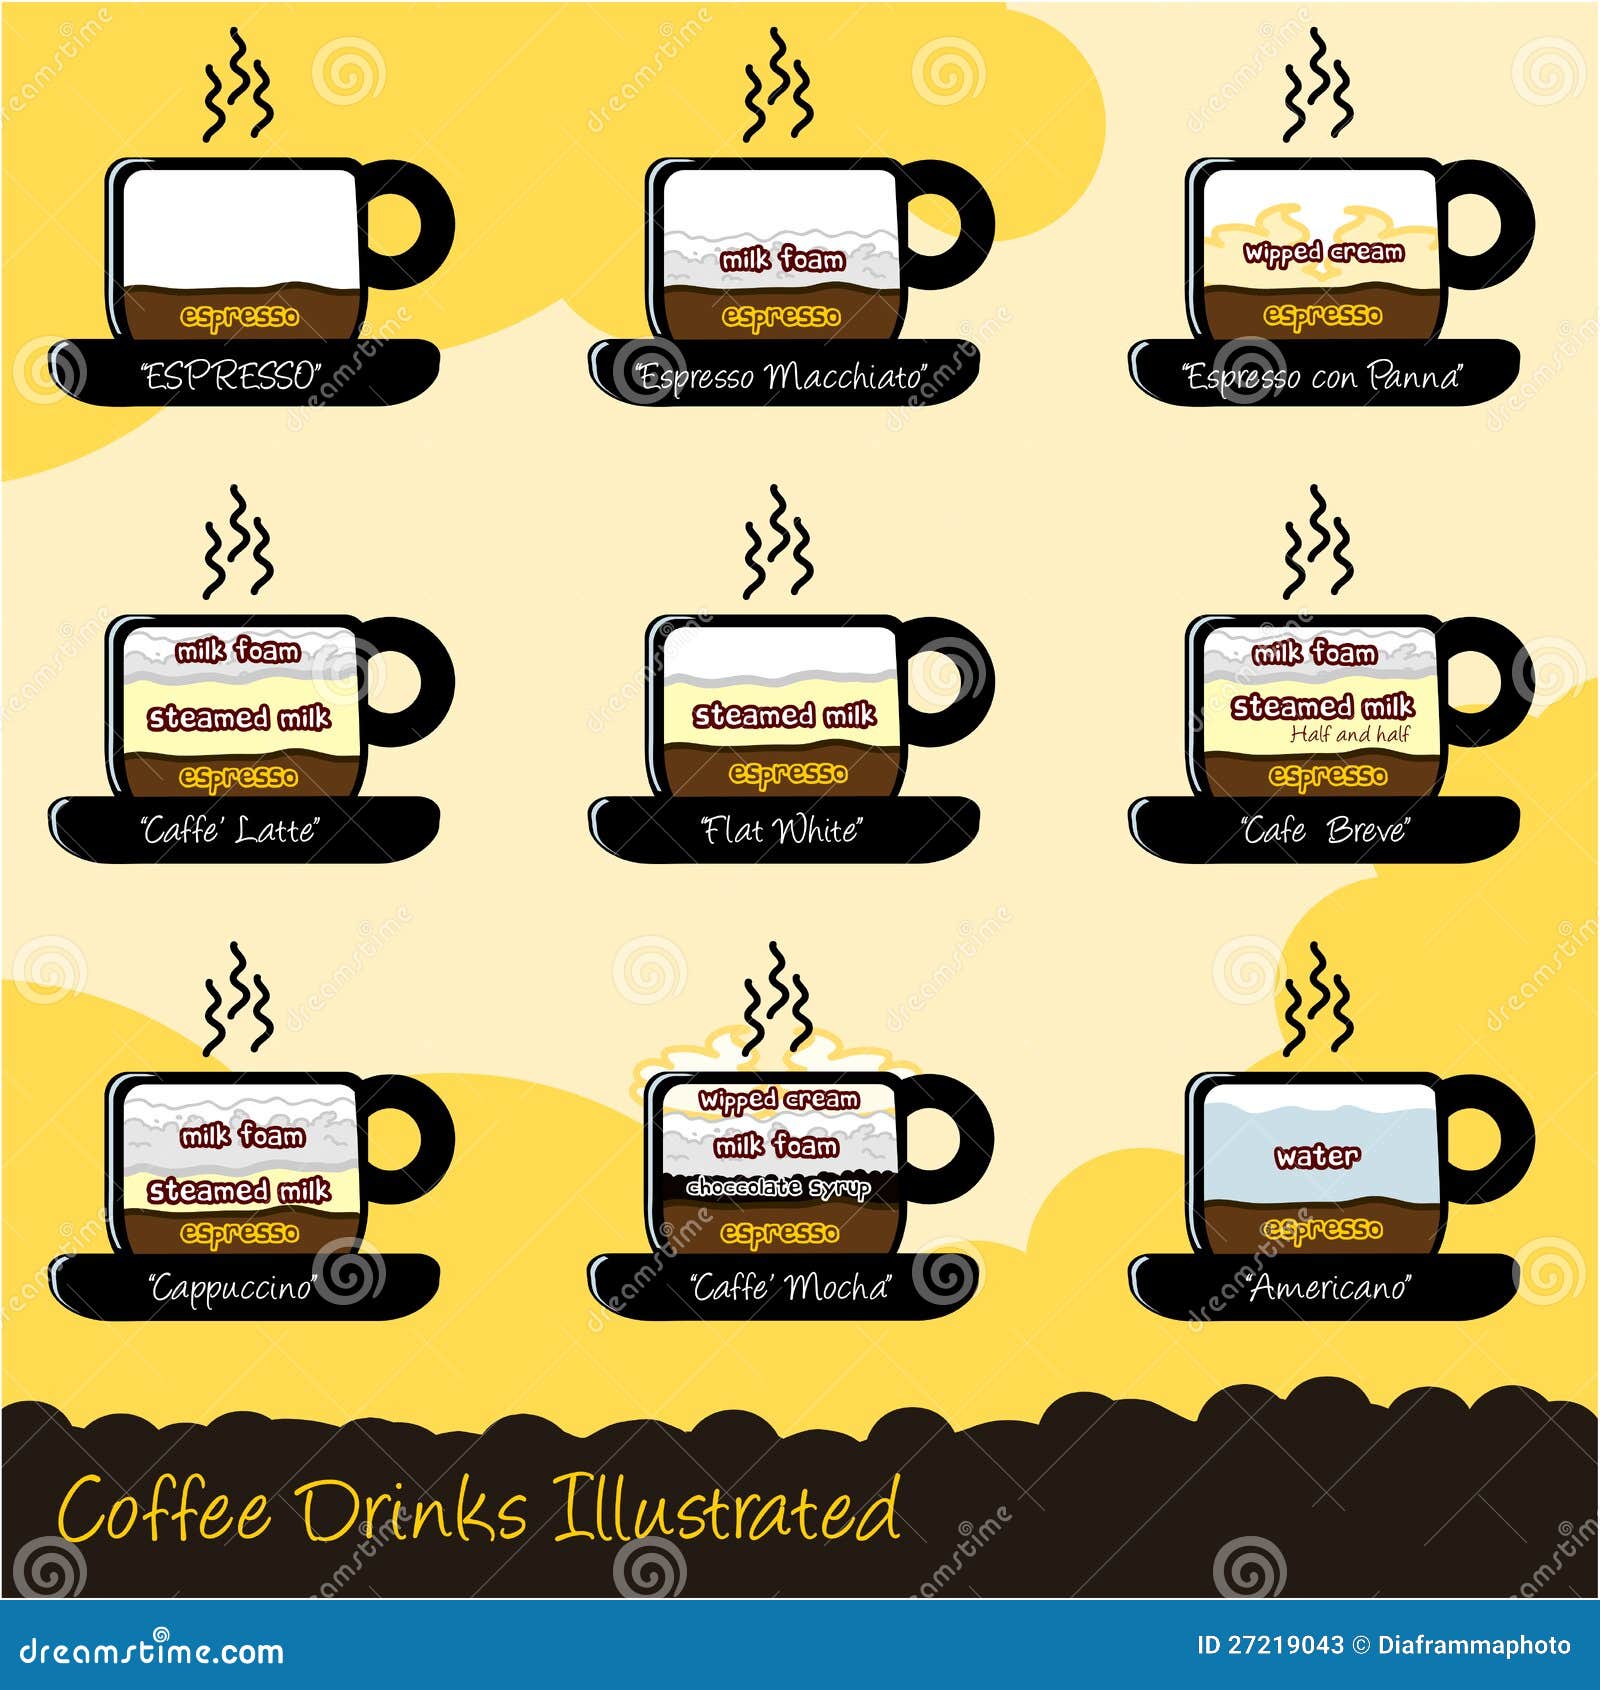 How To Make Different Types Of Coffee Chart